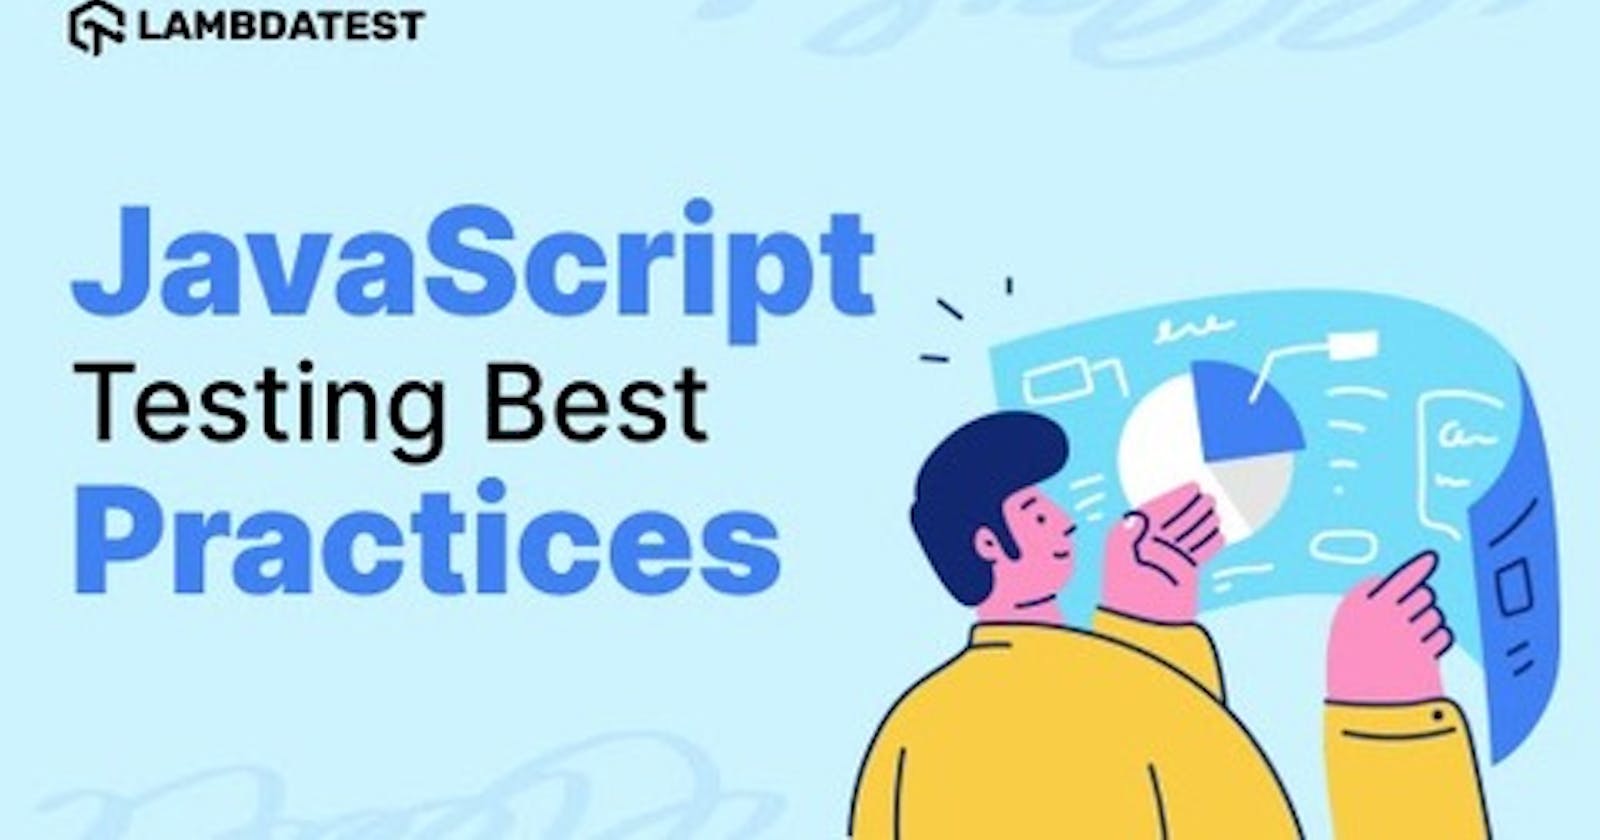 13 JavaScript Testing Best Practices You Should Know